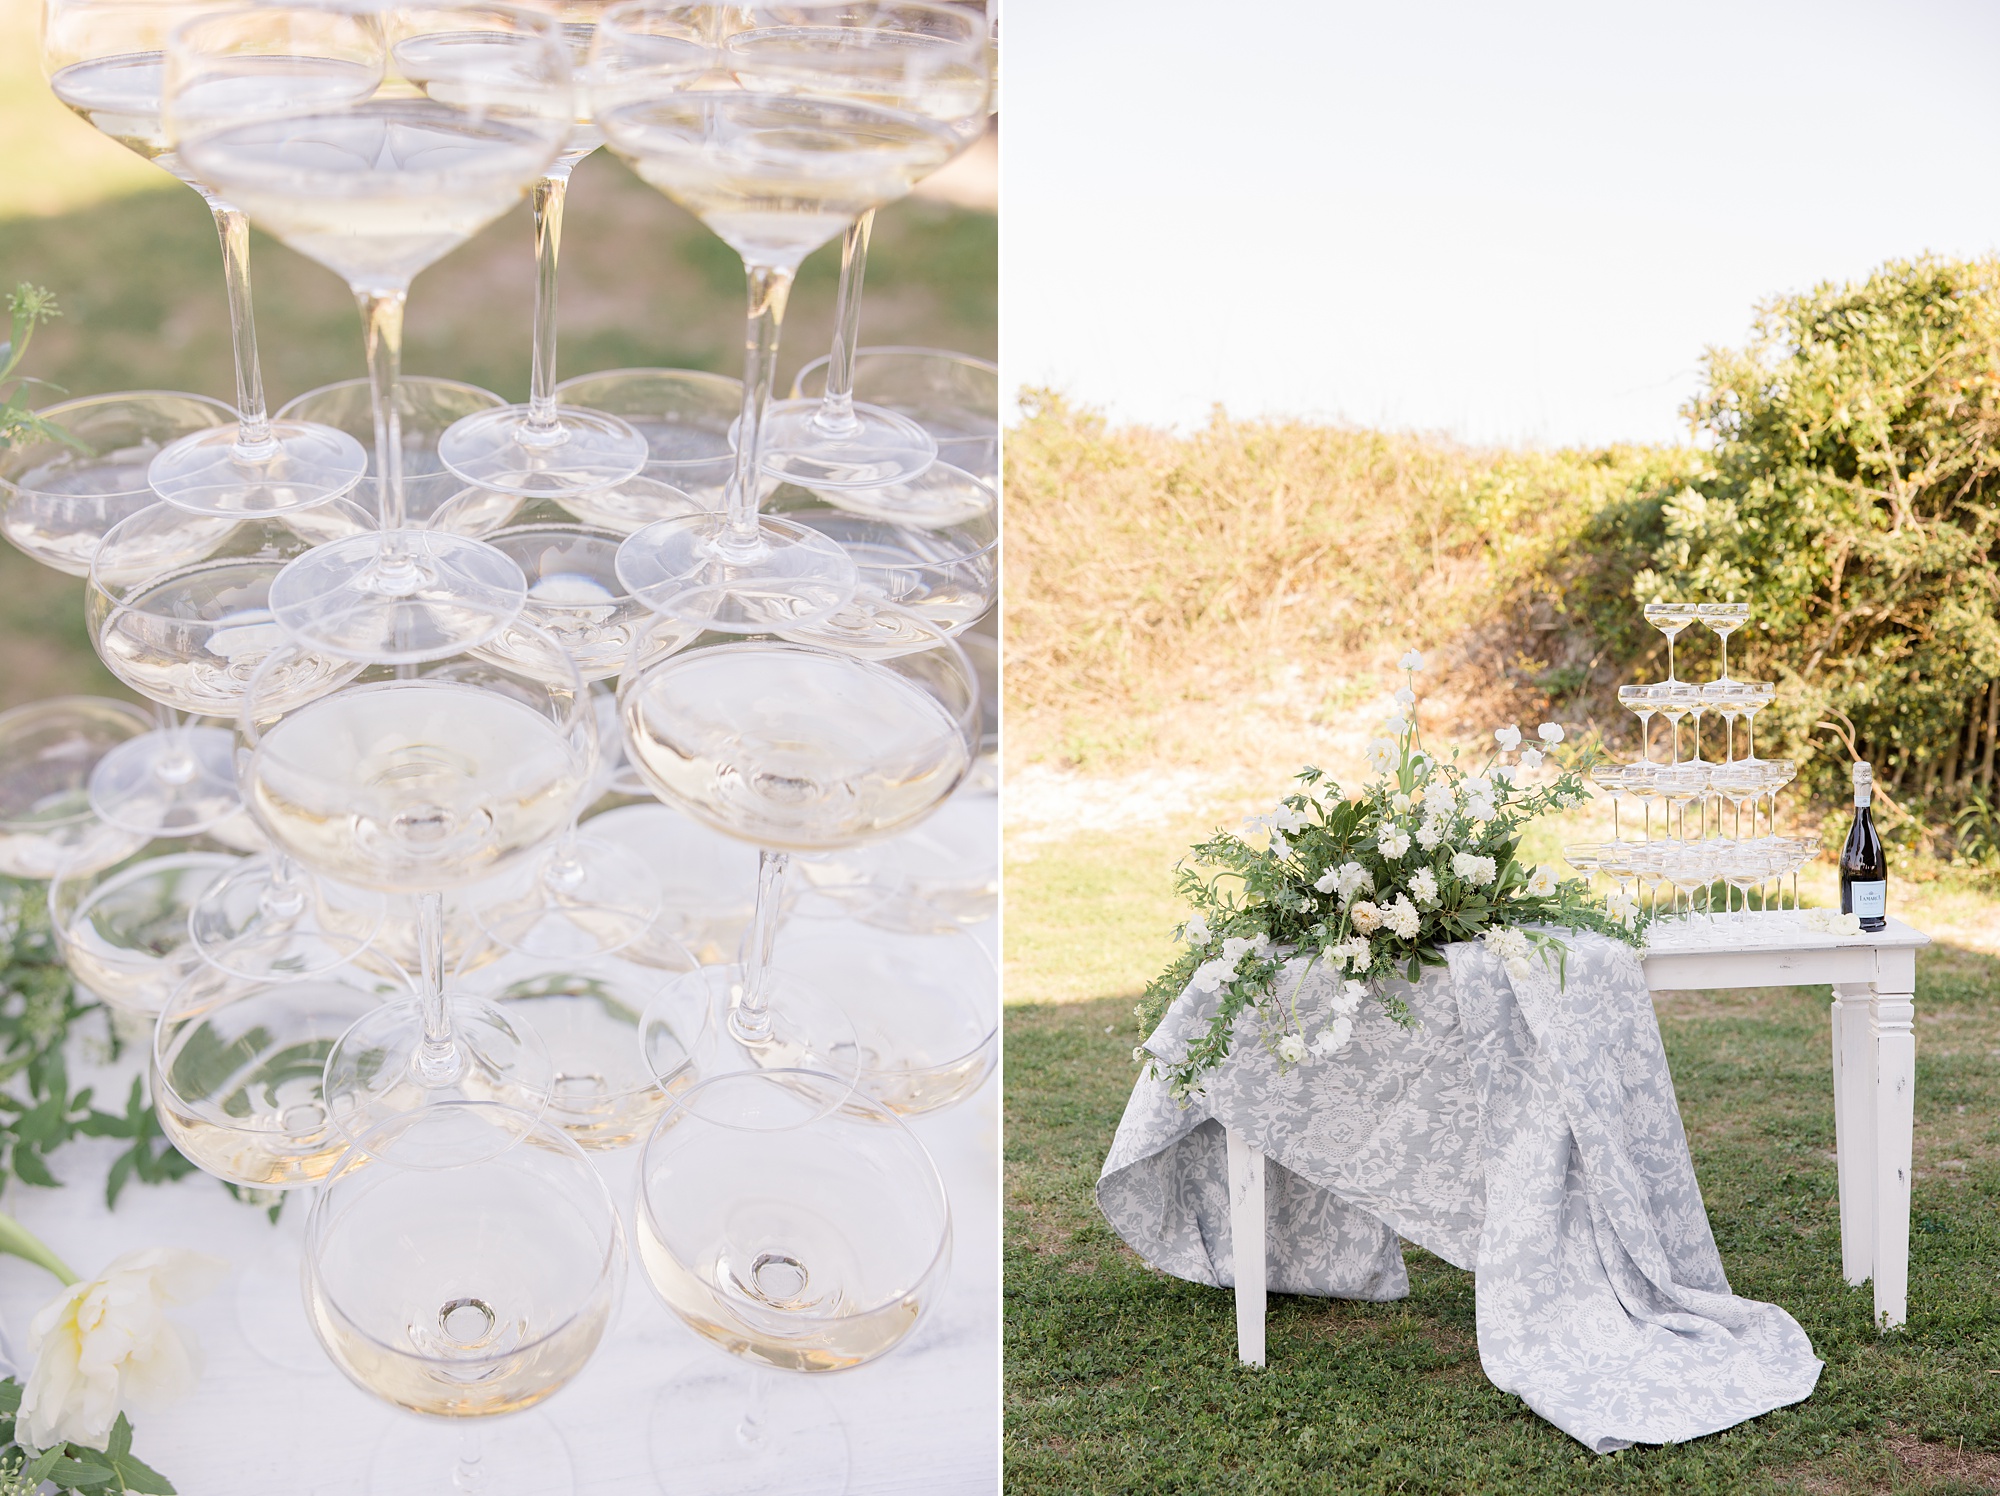 tower of champagne glasses for Folly Beach wedding reception